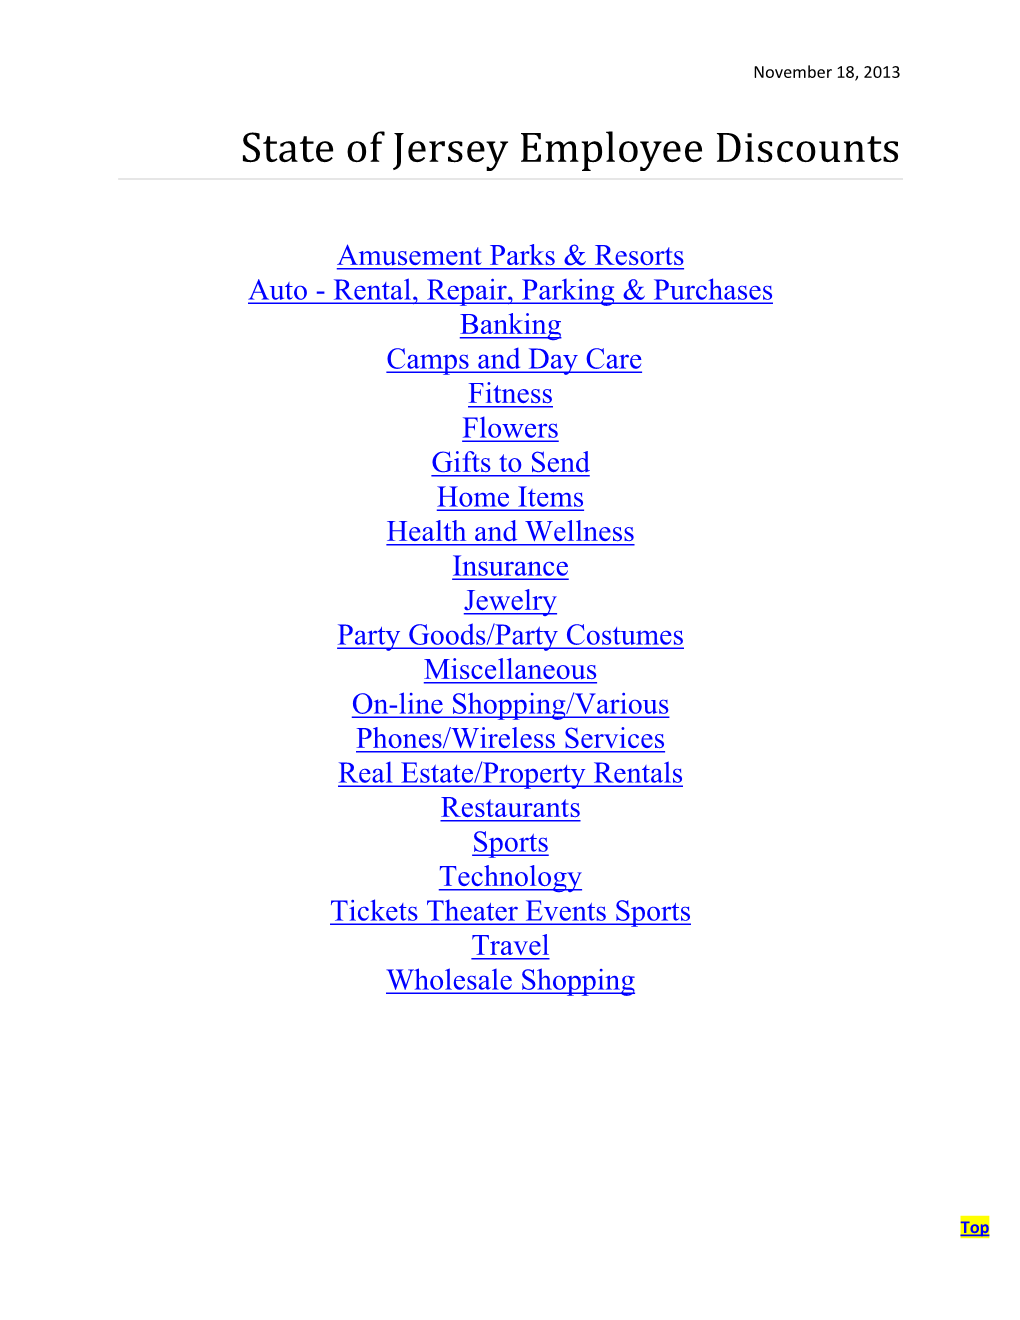 State of Jersey Employee Discounts